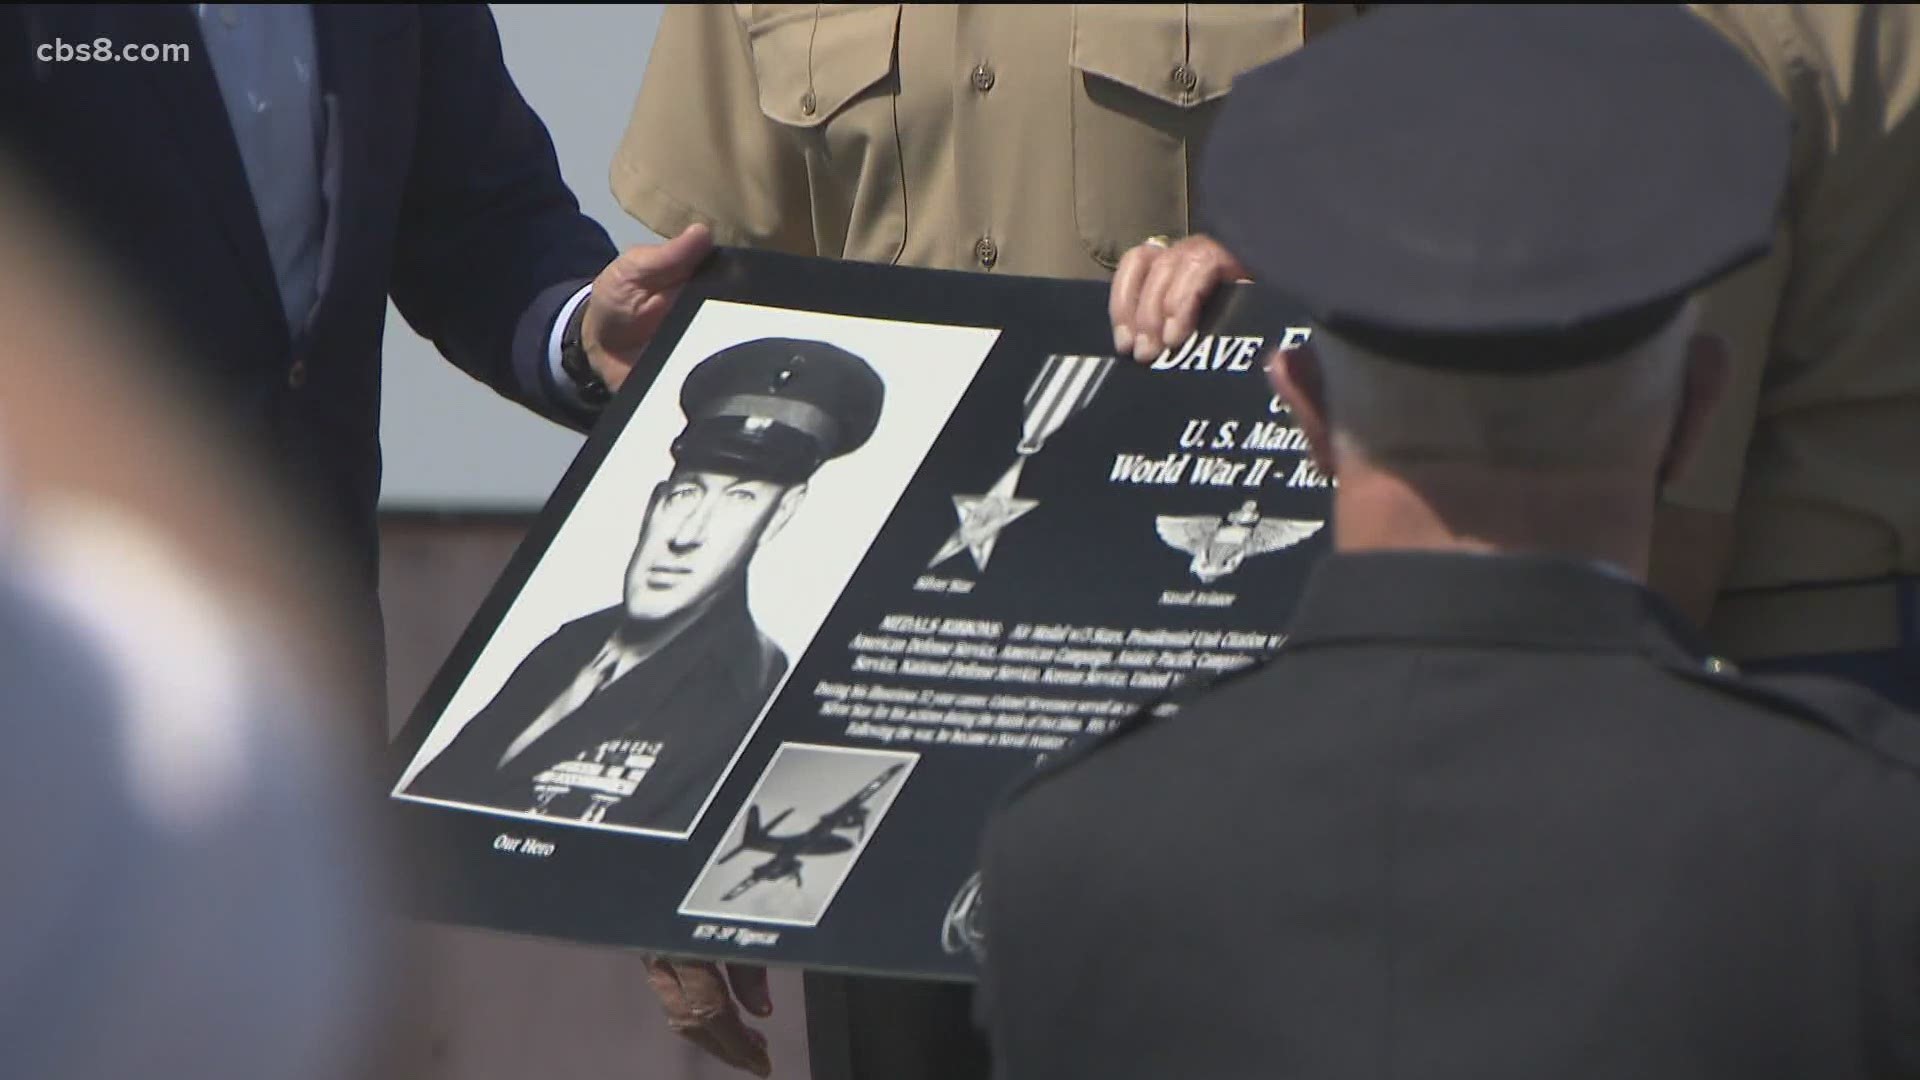 Ninety-nine-year-old Colonel Dave Severance was honored on Saturday for his actions in WWII.